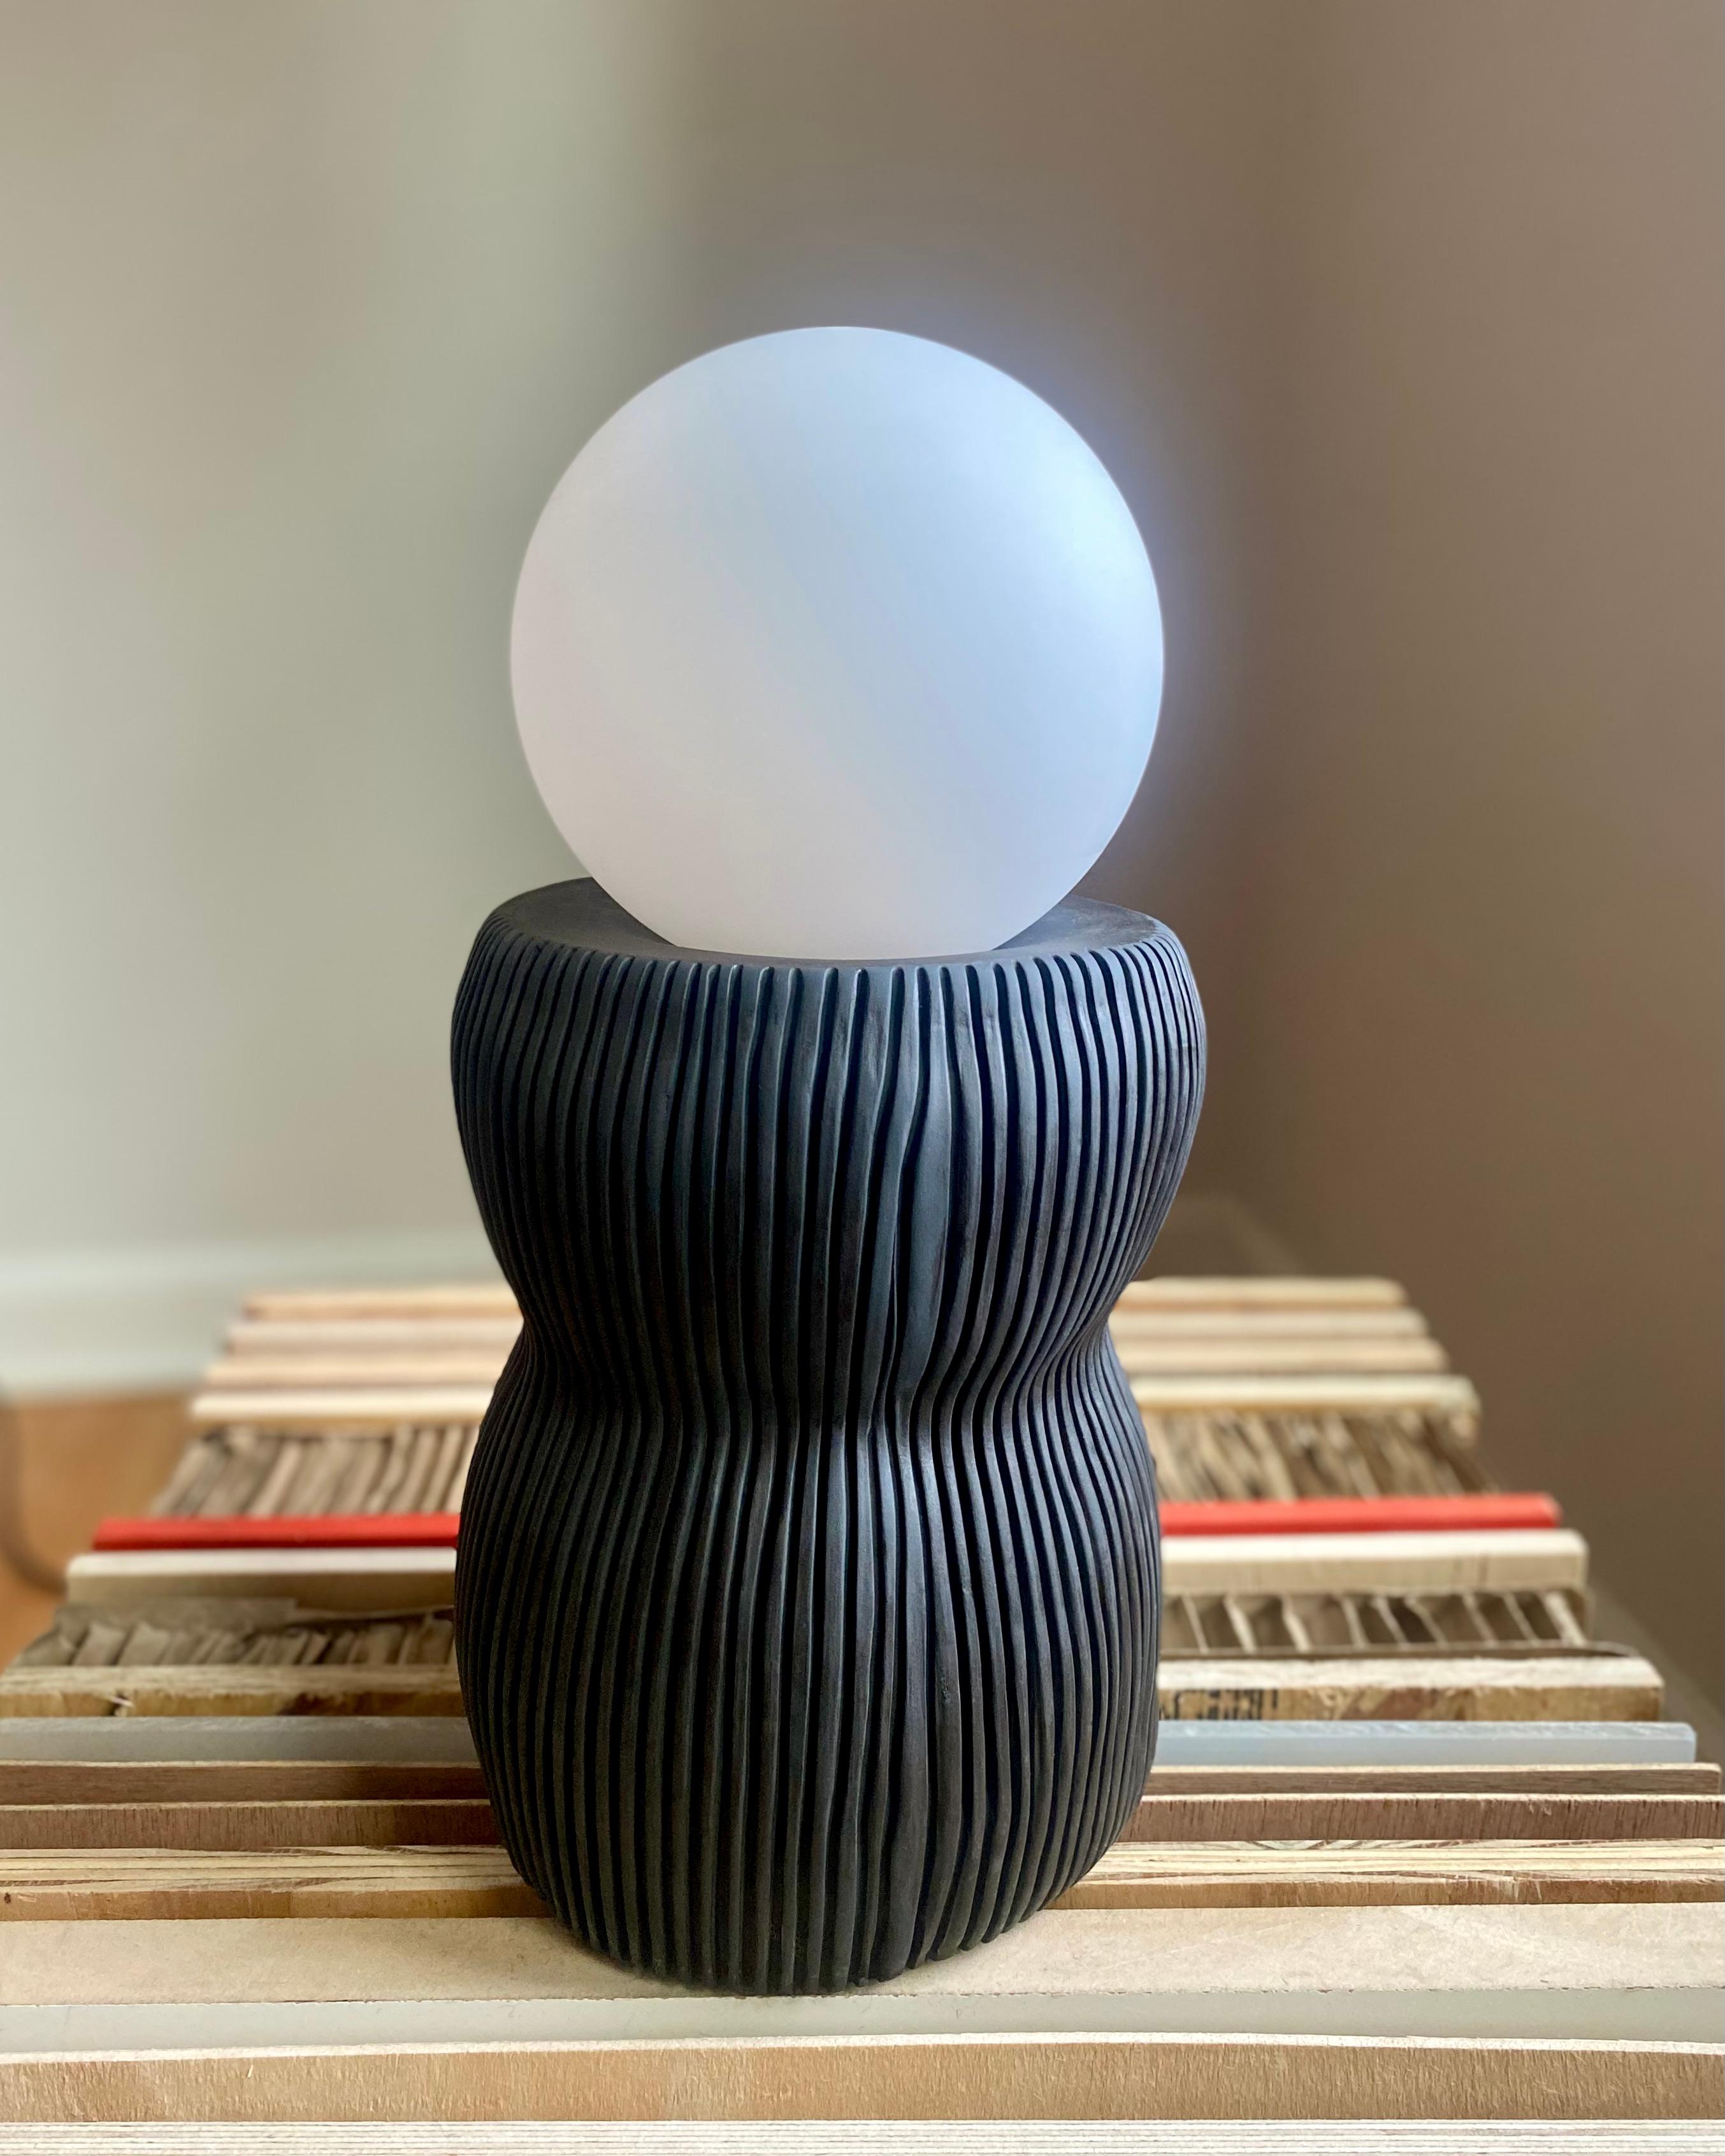 This sculptural table lamp is hand made from house-made, black porcelain. Each lamp is sculpted and carved using multiple techniques to achieve a vitreous & smooth finish. The lamp is left unglazed to highlight the beauty of the materials.
If you